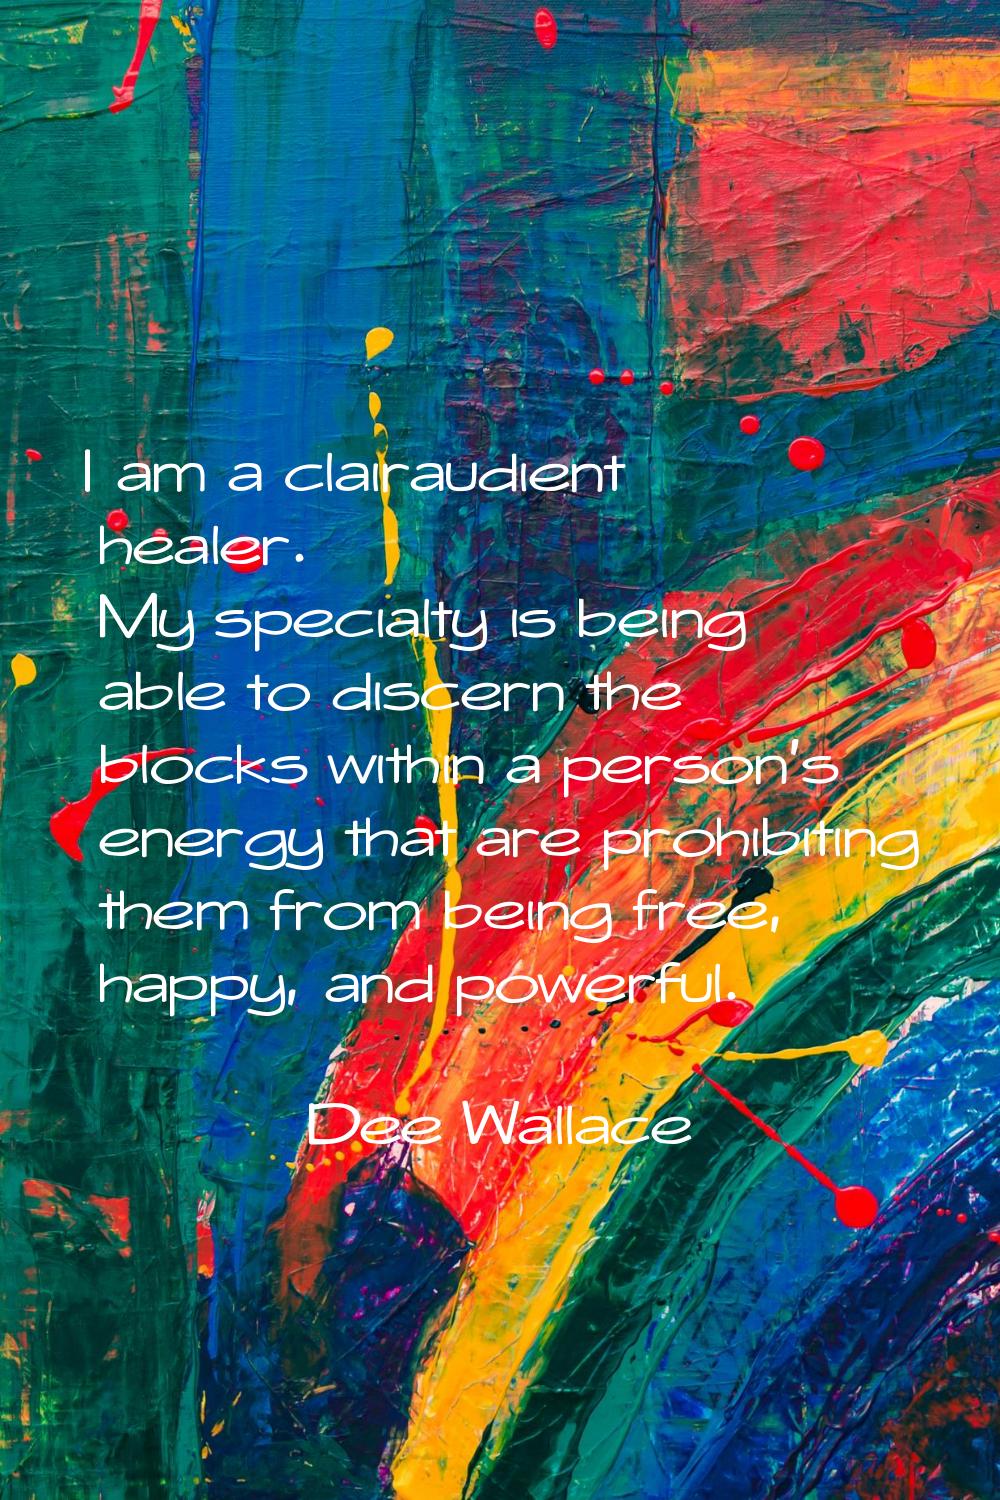 I am a clairaudient healer. My specialty is being able to discern the blocks within a person's ener